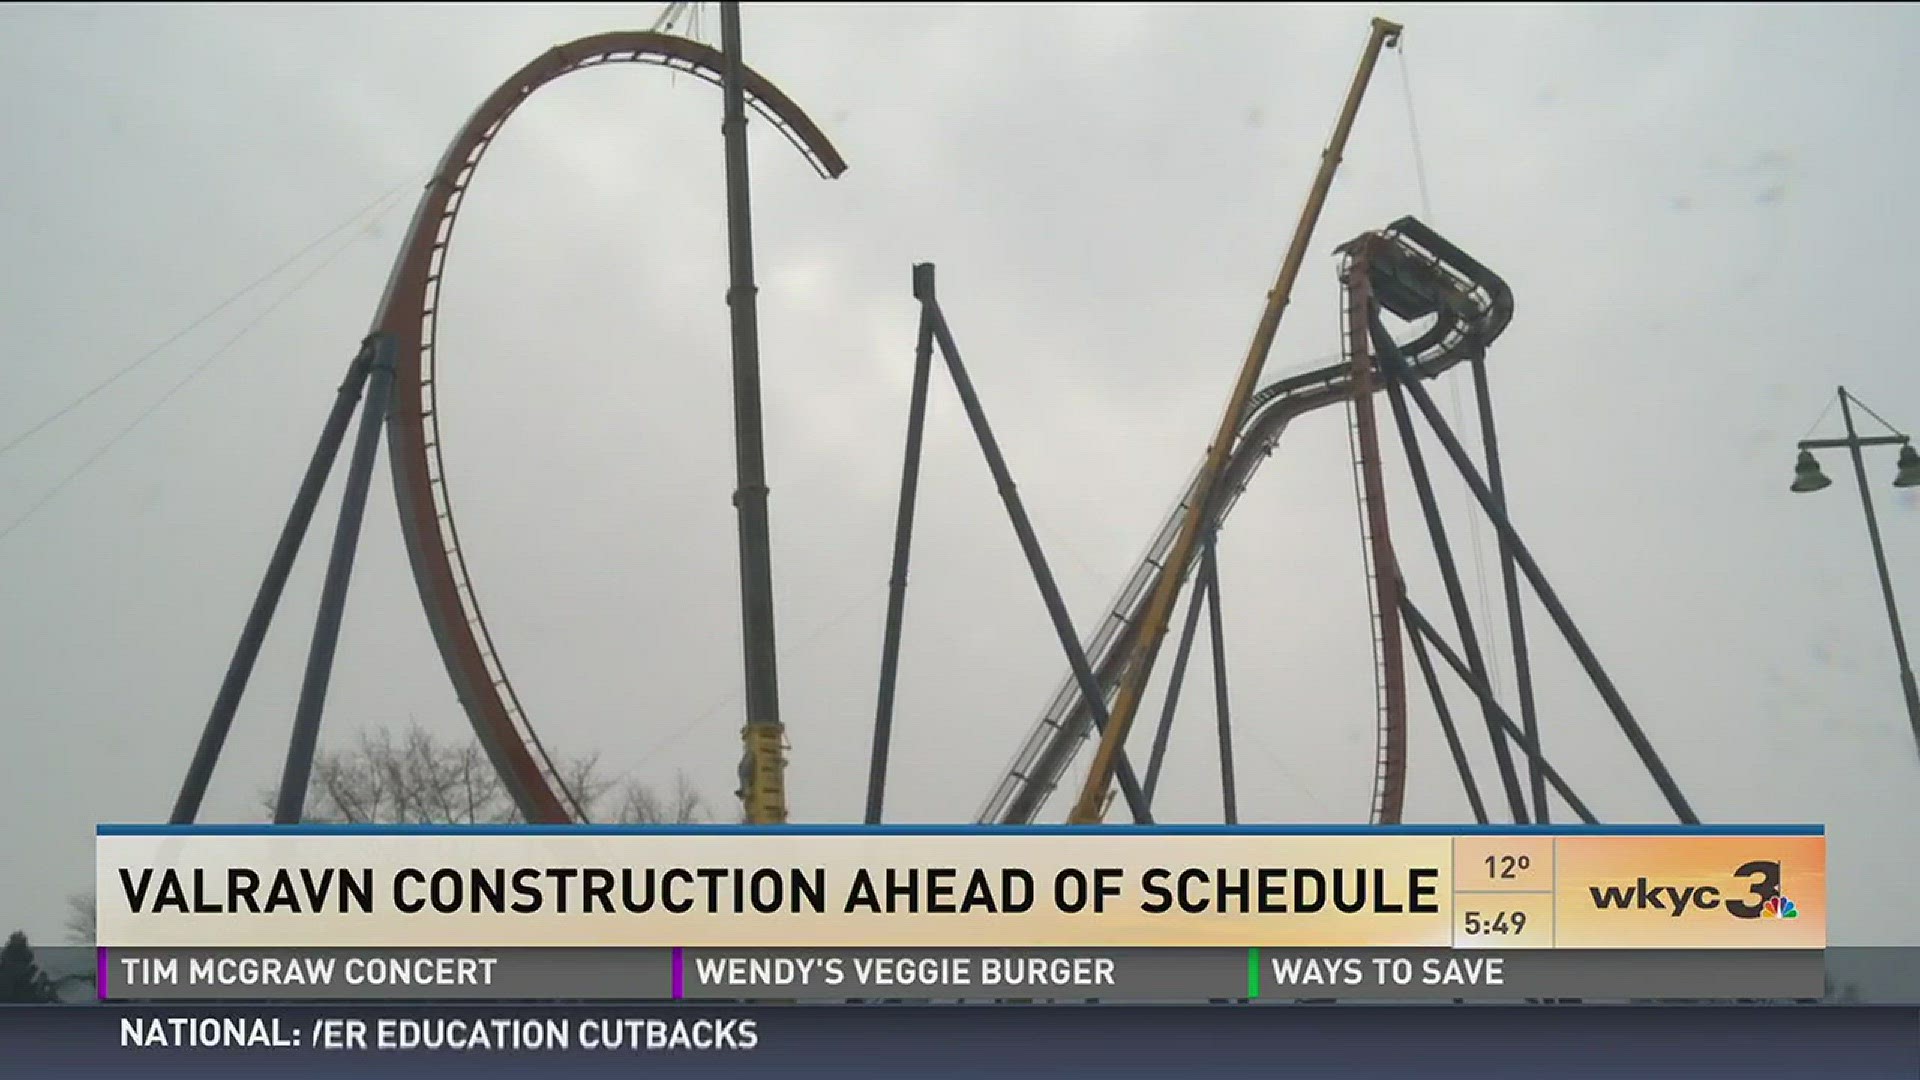 Jan. 21, 2016: Are you ready to ride? Mother Nature's warmer-than-usual winter mood has helped push Valravn's coaster construction ahead of schedule at Cedar Point. WKYC's Ryan Haidet has an update on how the ride is rising in Sandusky.